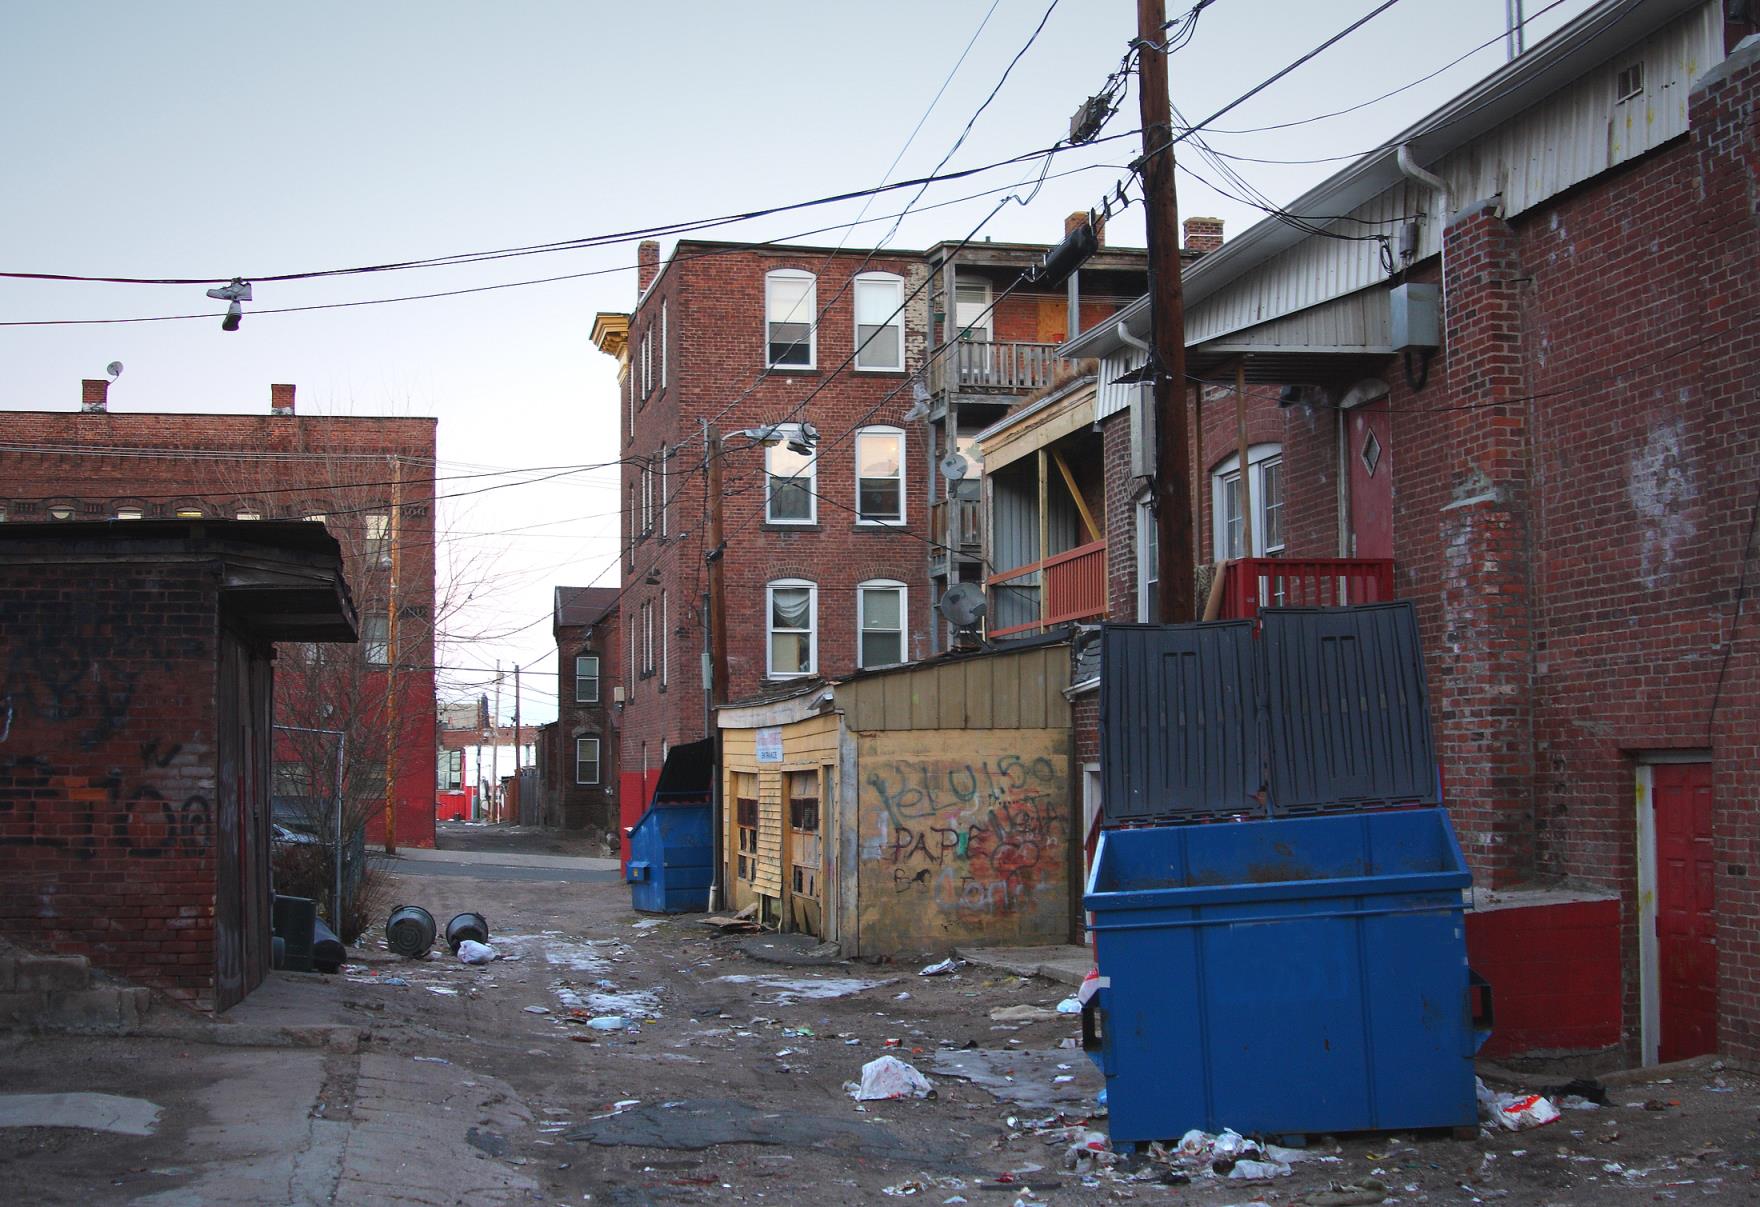 A trash-filled urban alleyway in an inner city urban neighborhood, with graffiti, trash and poorly maintained, aging buildings in the background.